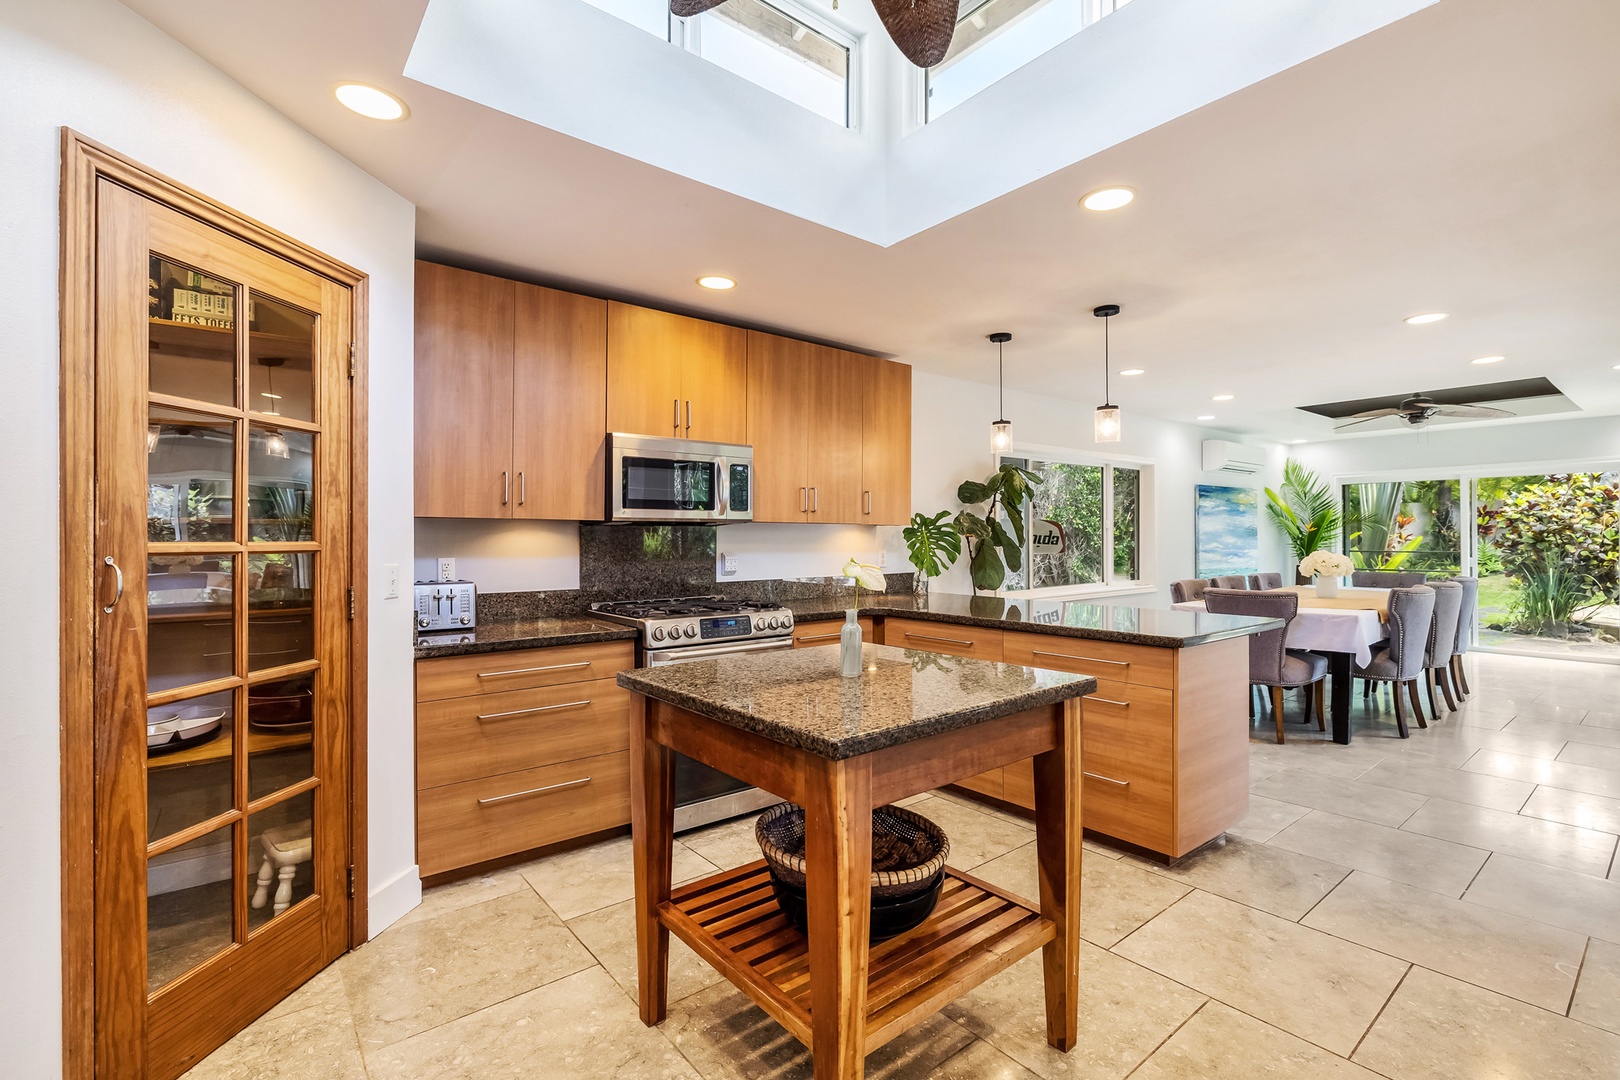 Honolulu Vacation Rentals, Hale Ho'omaha - Can you imagine preparing your favorite meals here?